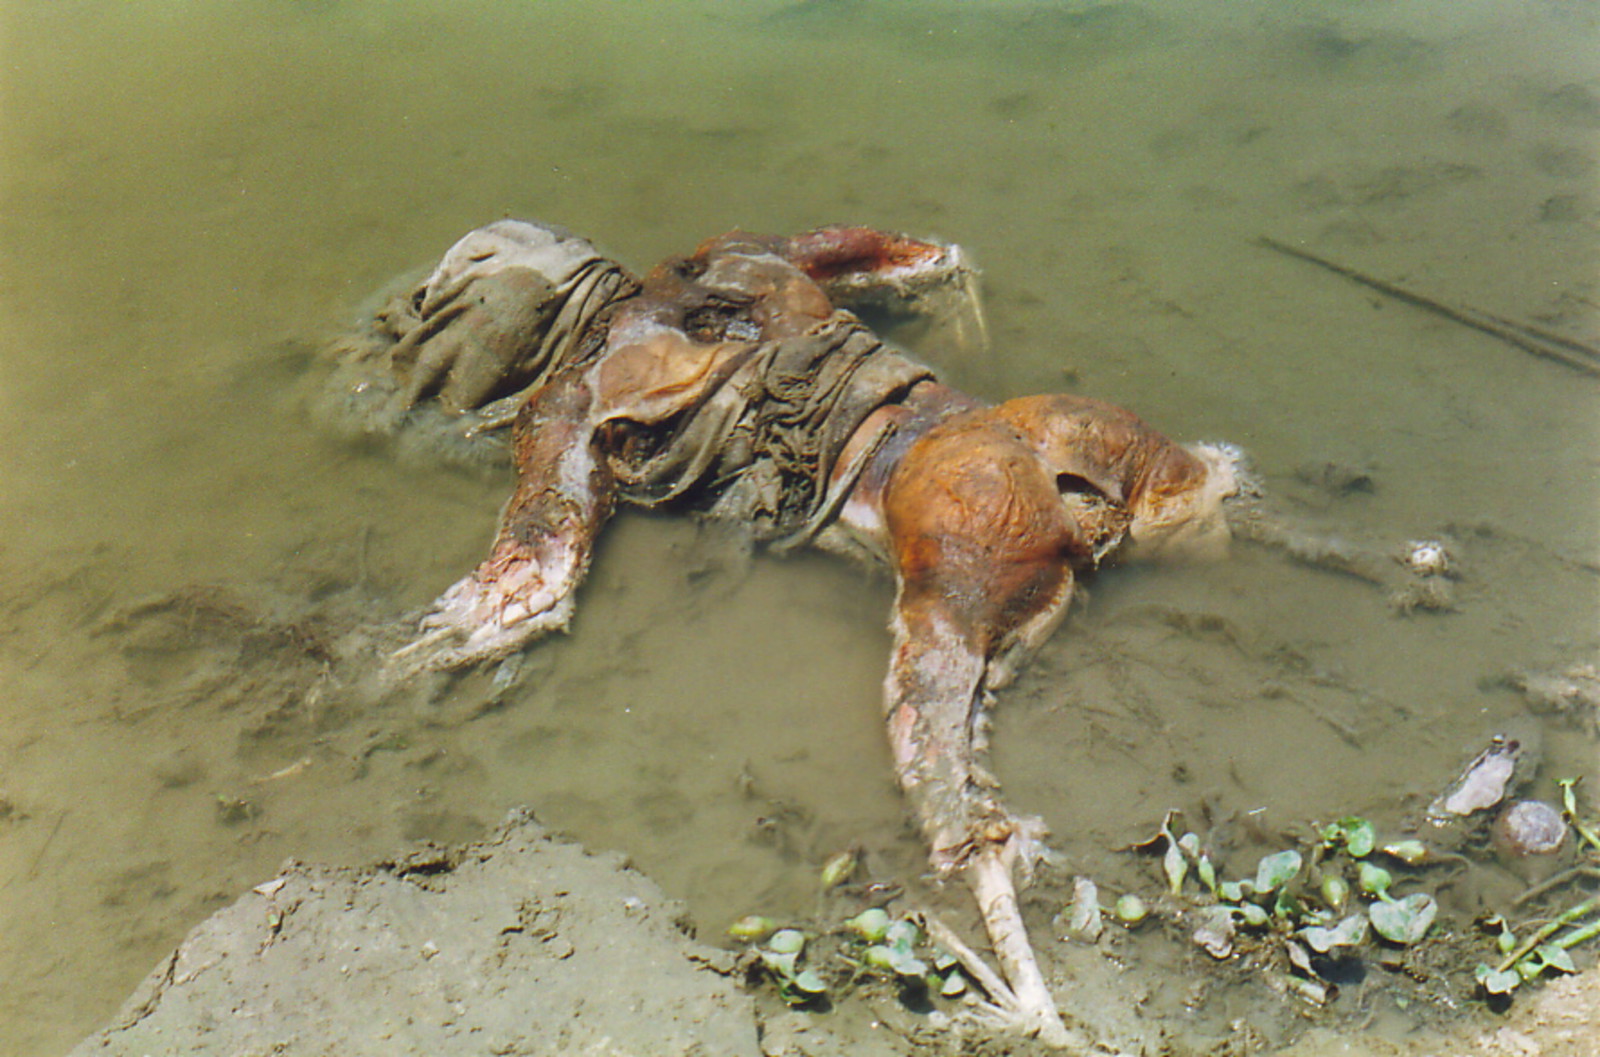 A putrefying body on the east bank of the Ganges